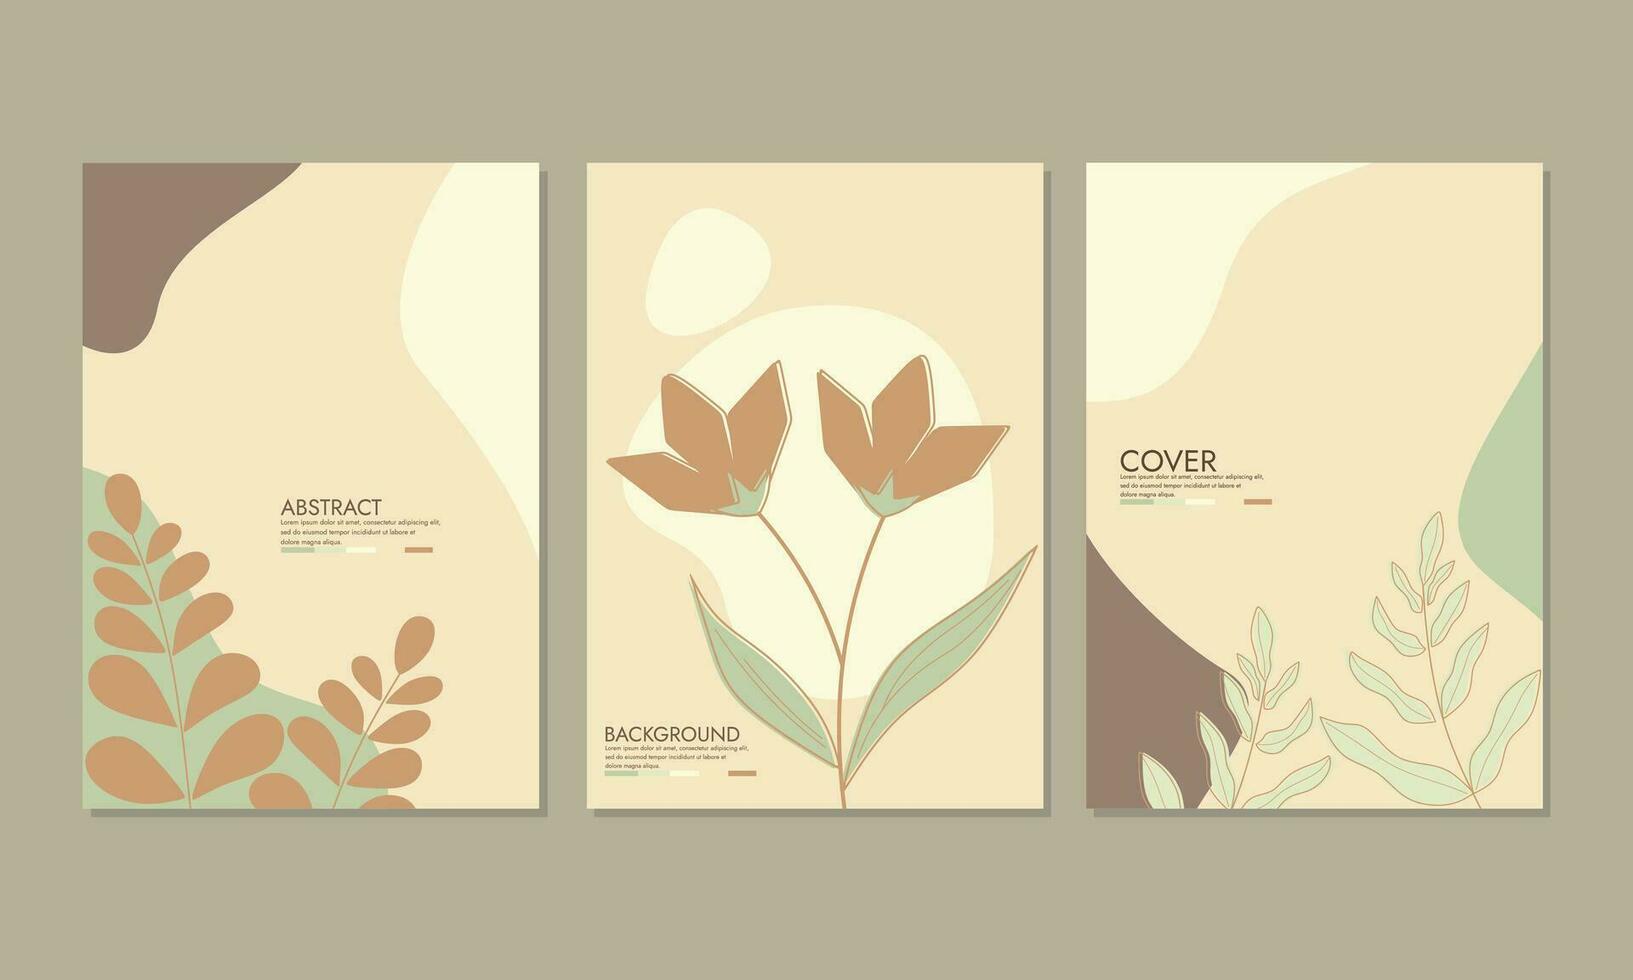 Cover page templates. Universal abstract layouts. Applicable for notebooks, social media posts, stories, mobile apps, banners design, web or internet ads vector